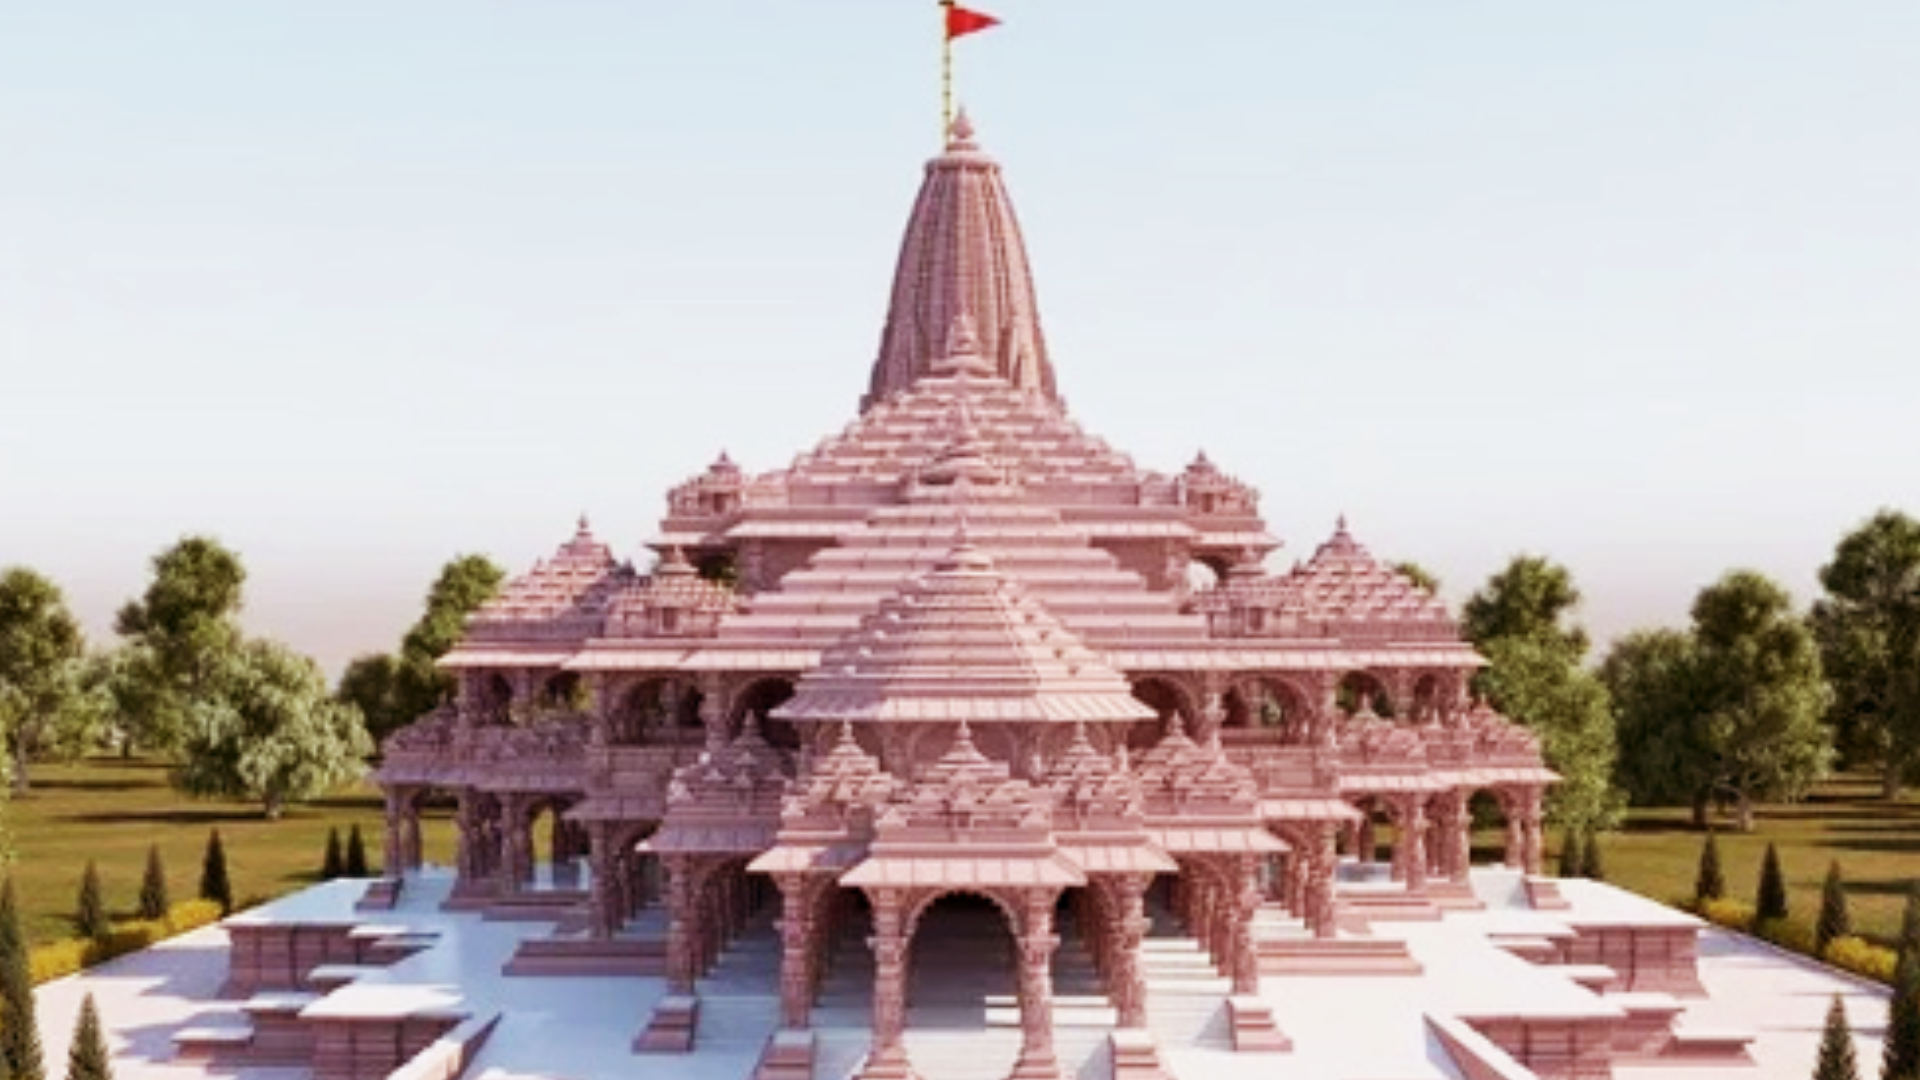 History behind the construction of Ram Temple